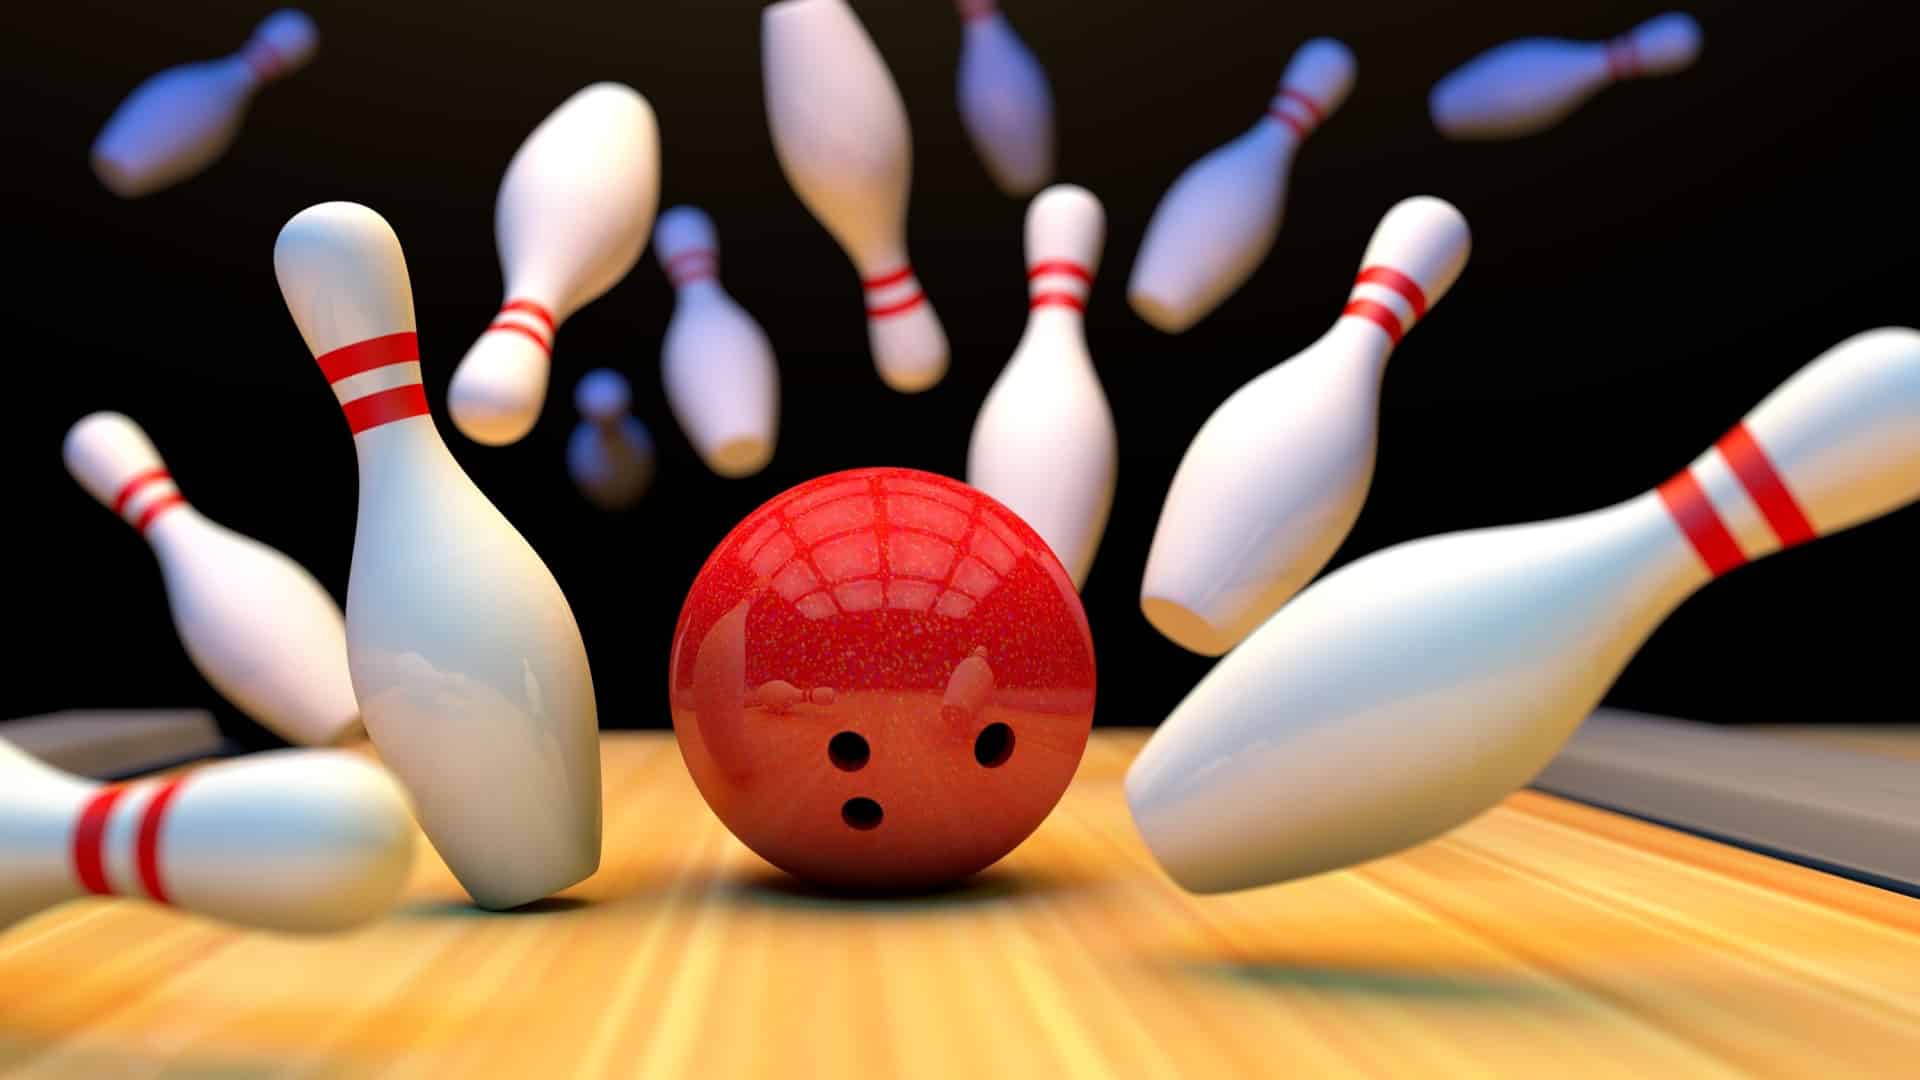 Cannabinthusiast | Is “The Big Lebowski” the Greatest Stoner Movie? - Bowling